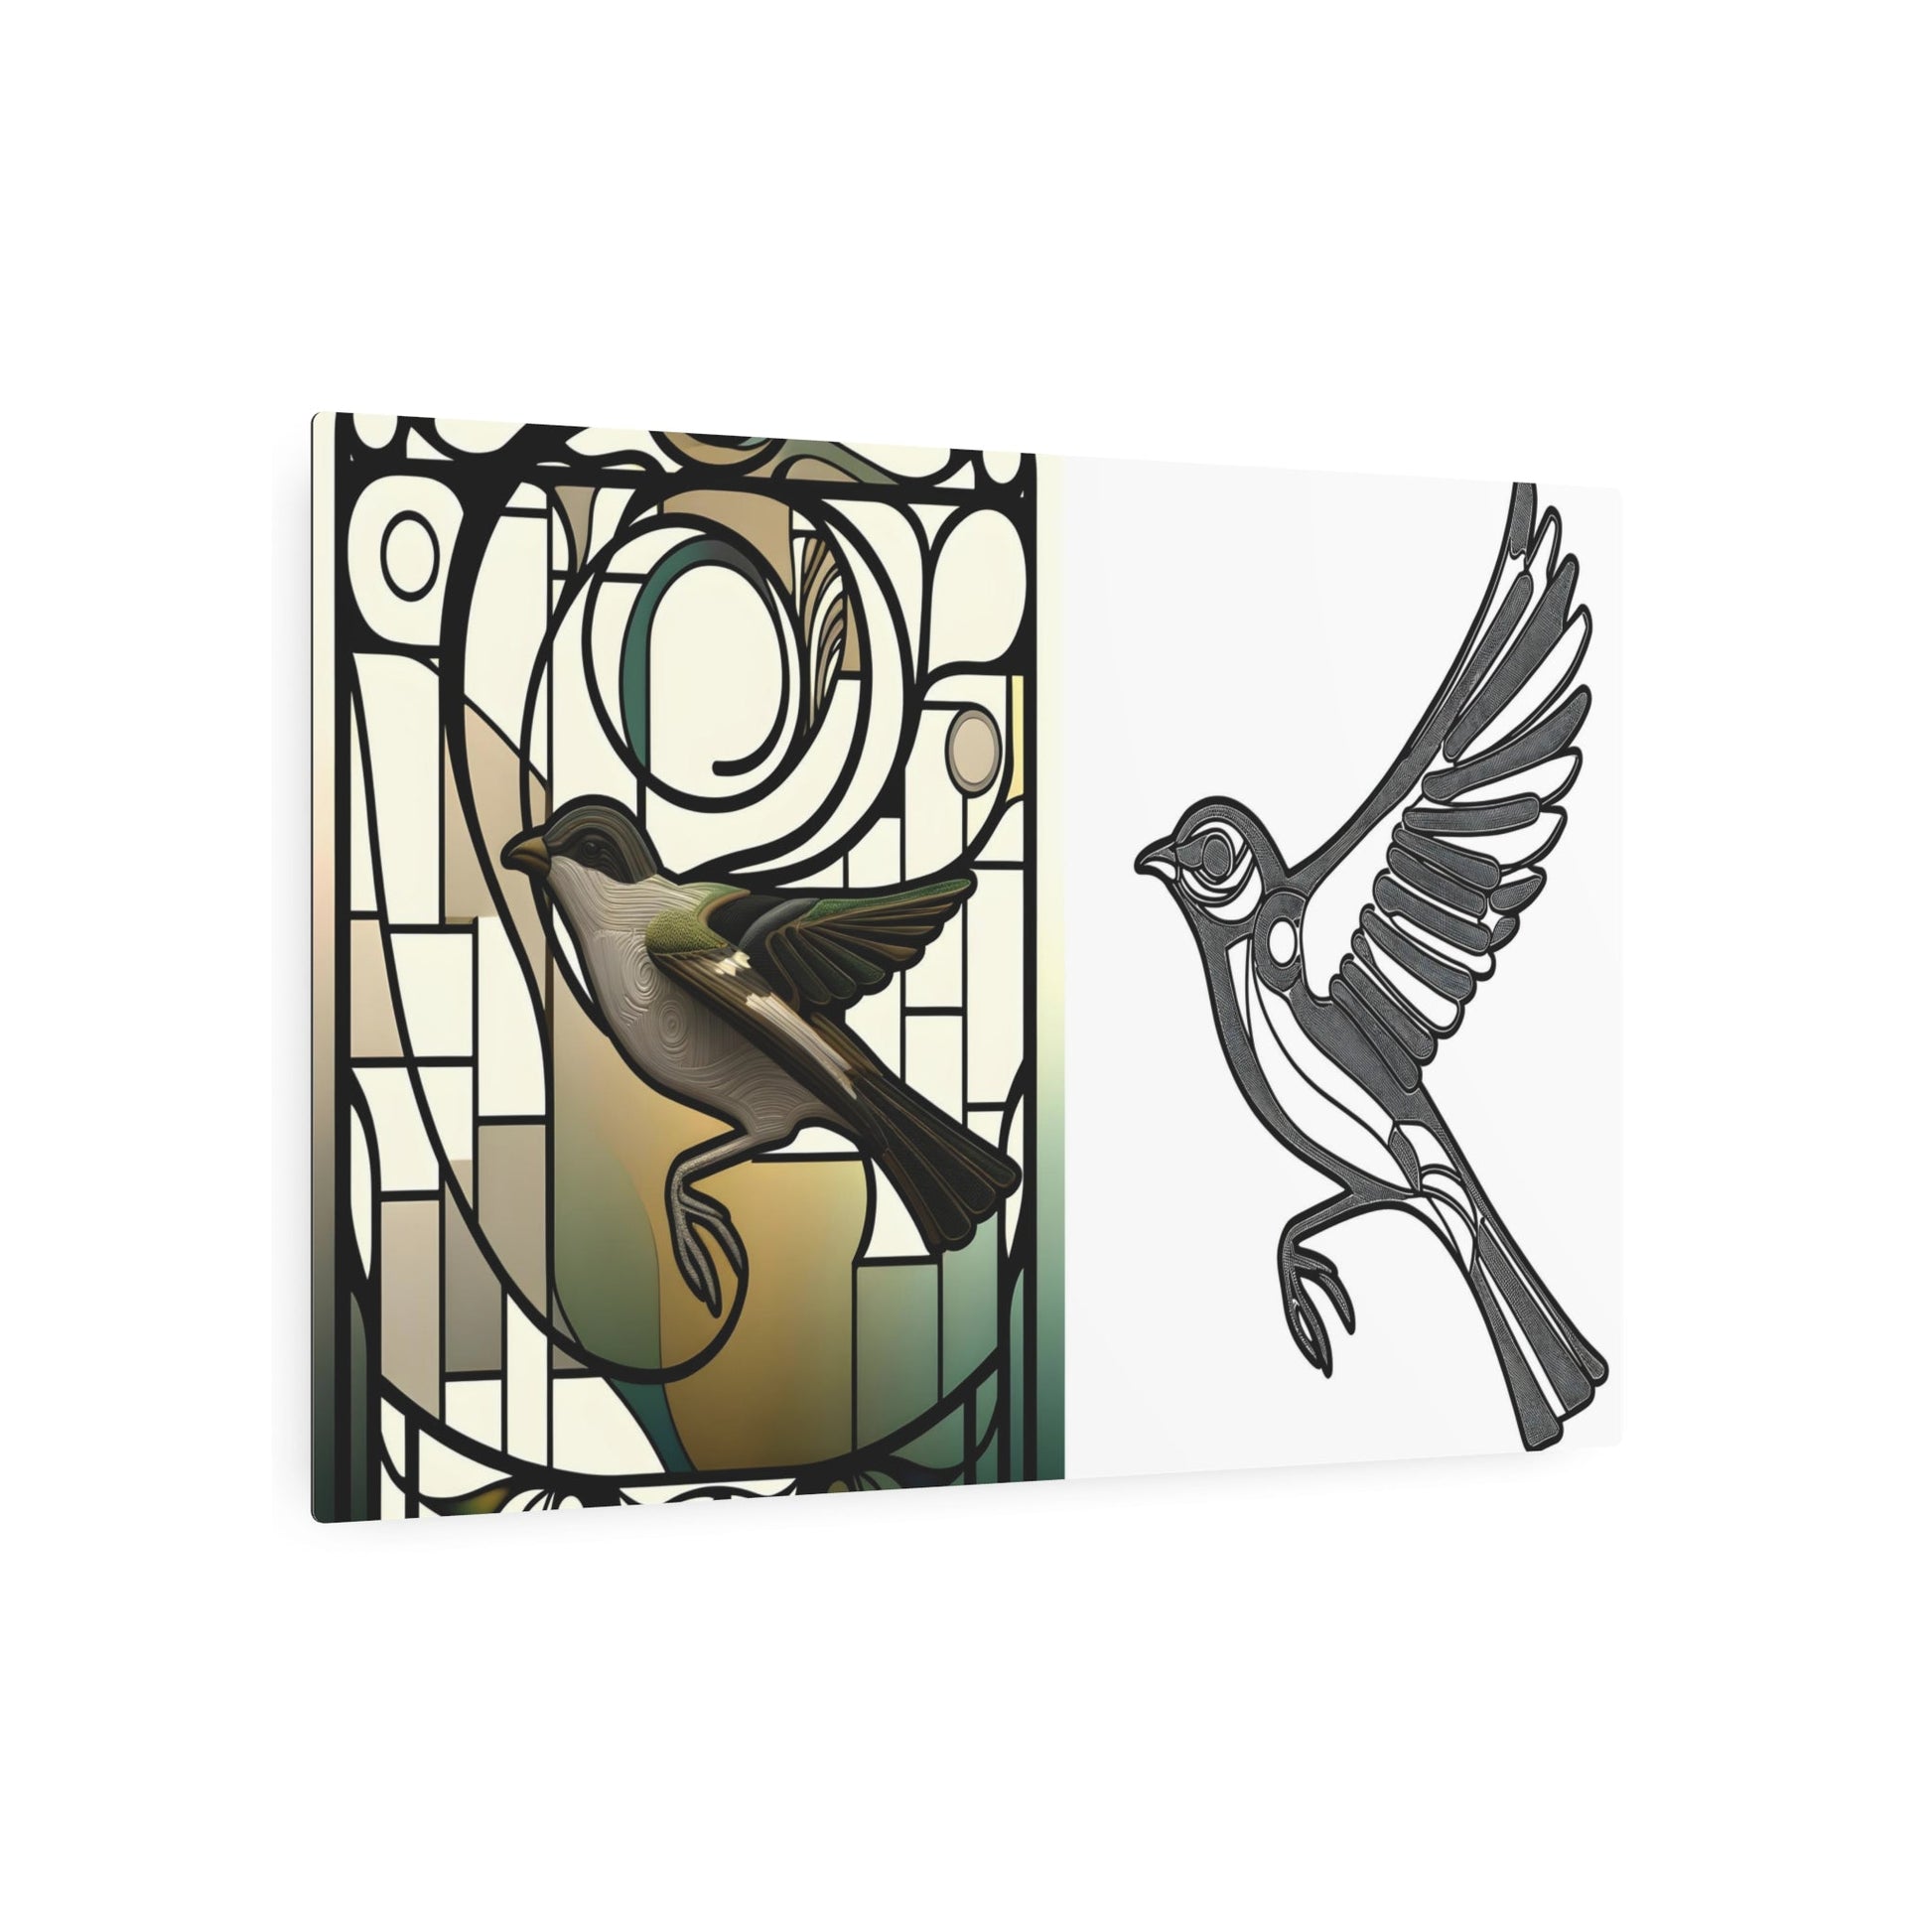 Metal Poster Art | "Art Nouveau Inspired Bird Illustration with Intricate Patterns - Western Art Styles Collection" - Metal Poster Art 36″ x 24″ (Horizontal) 0.12''